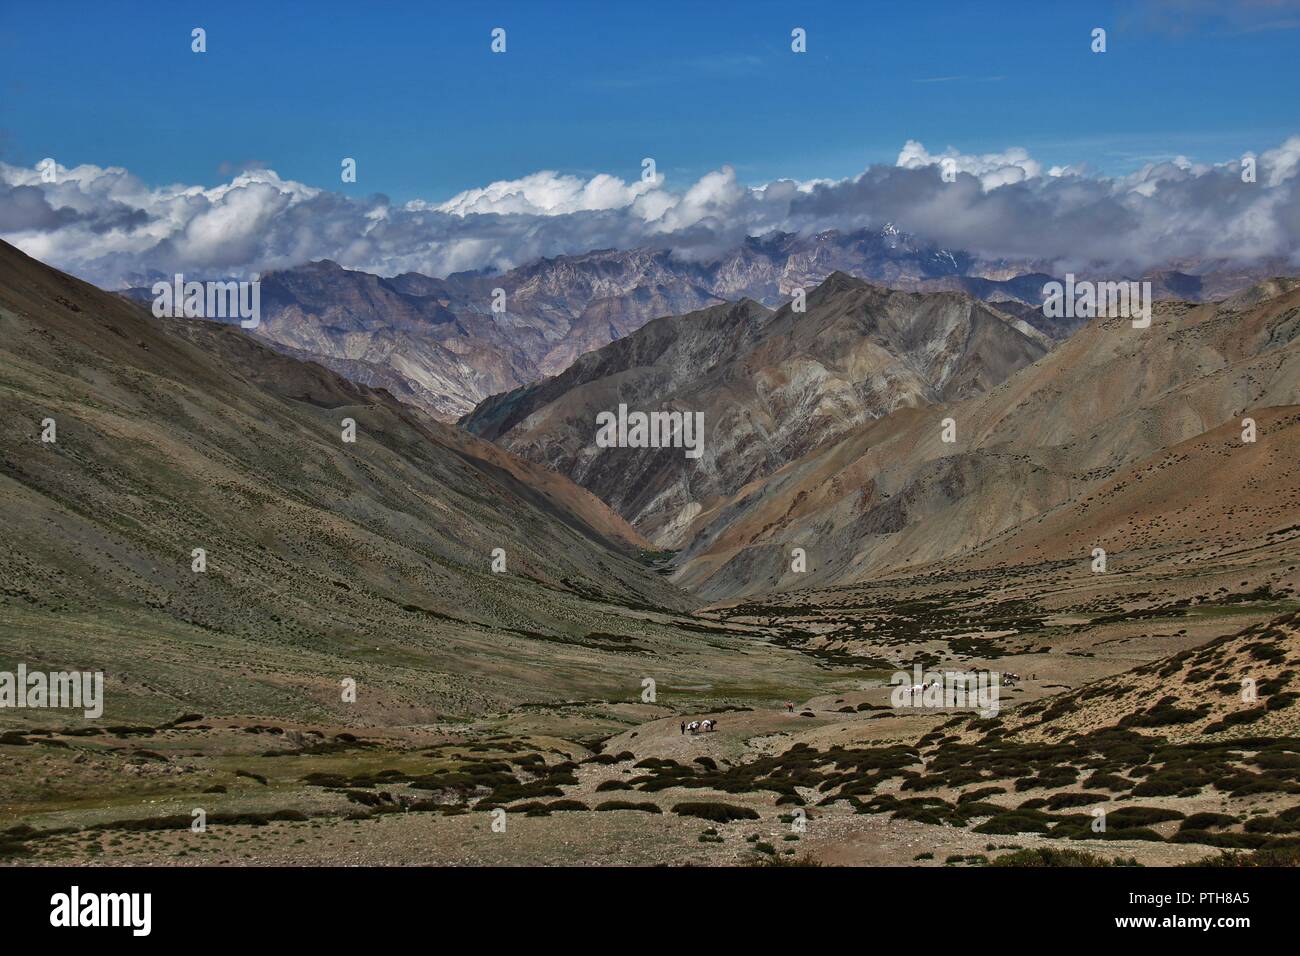 Spectacular views in the Himalayas Stock Photo